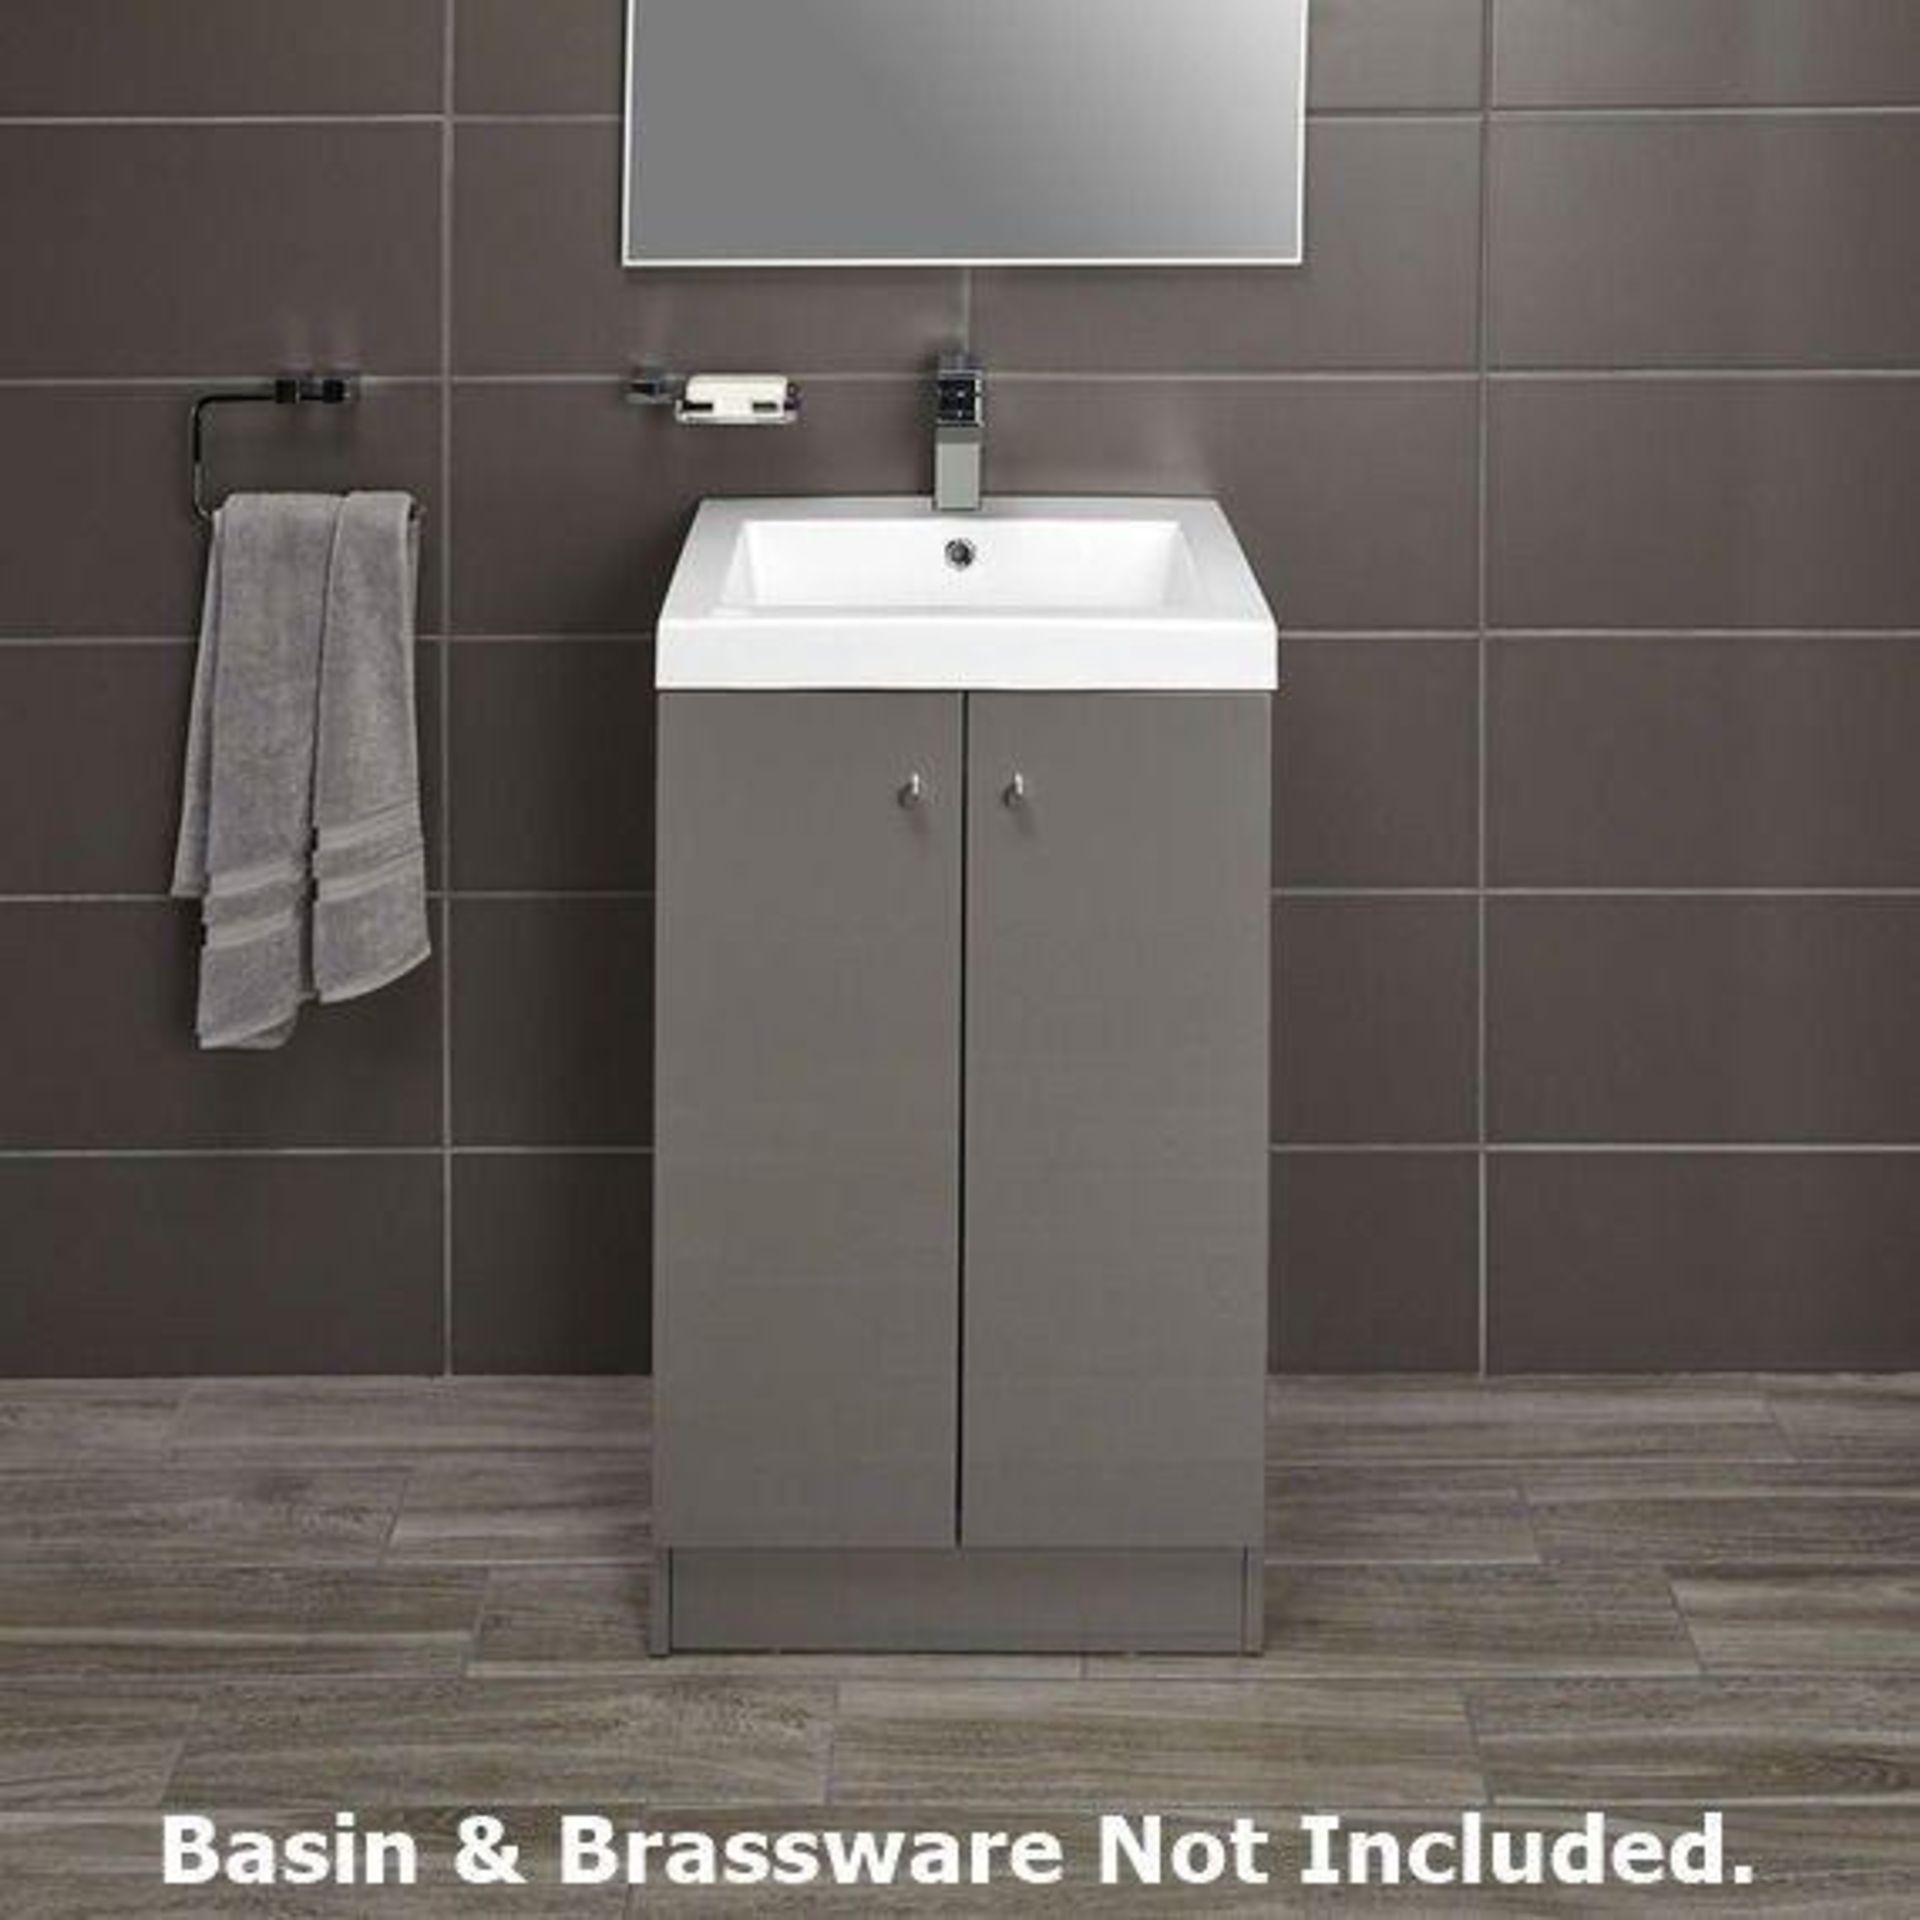 1 x Alpine Duo 500 Floor Standing Vanity Unit - Ultra-Modern Square Design With Soft Close Doors and